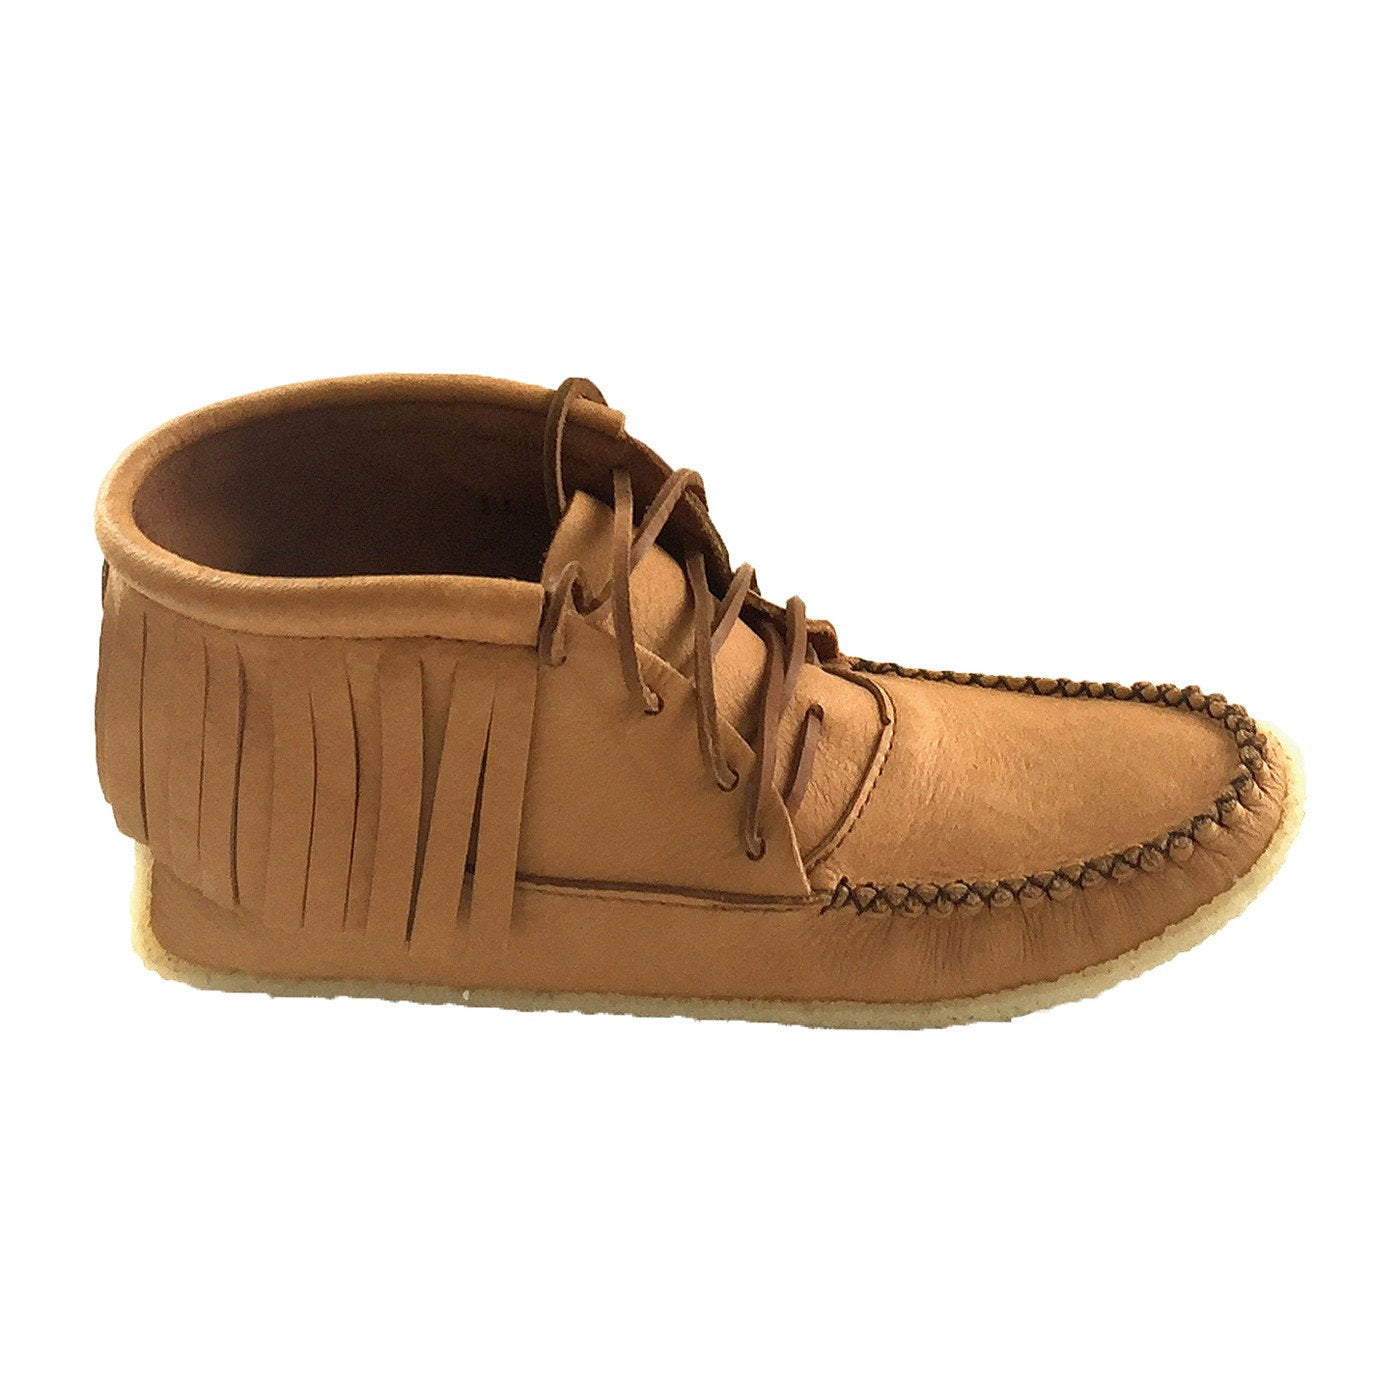 Men's Fringed Ankle Moccasin Boots